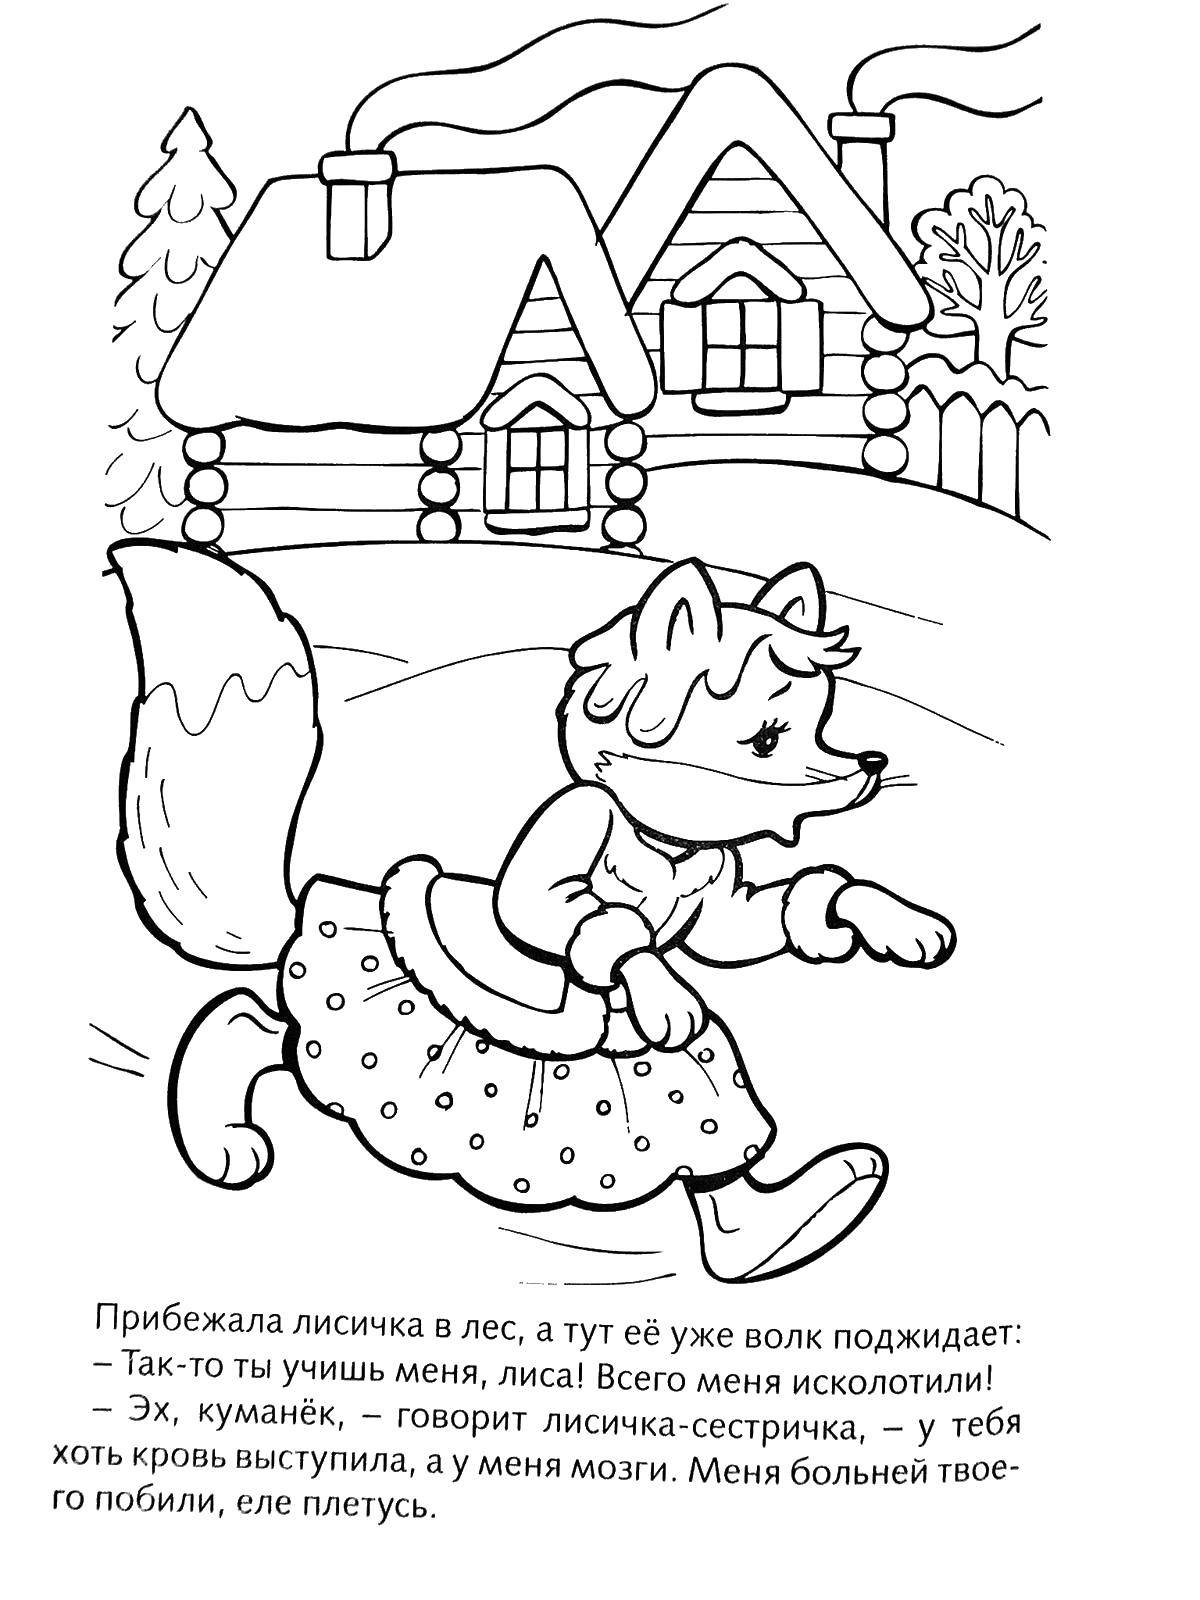 Coloring The Fox and the wolf. Category Fairy tales. Tags:  Fox, wolf.